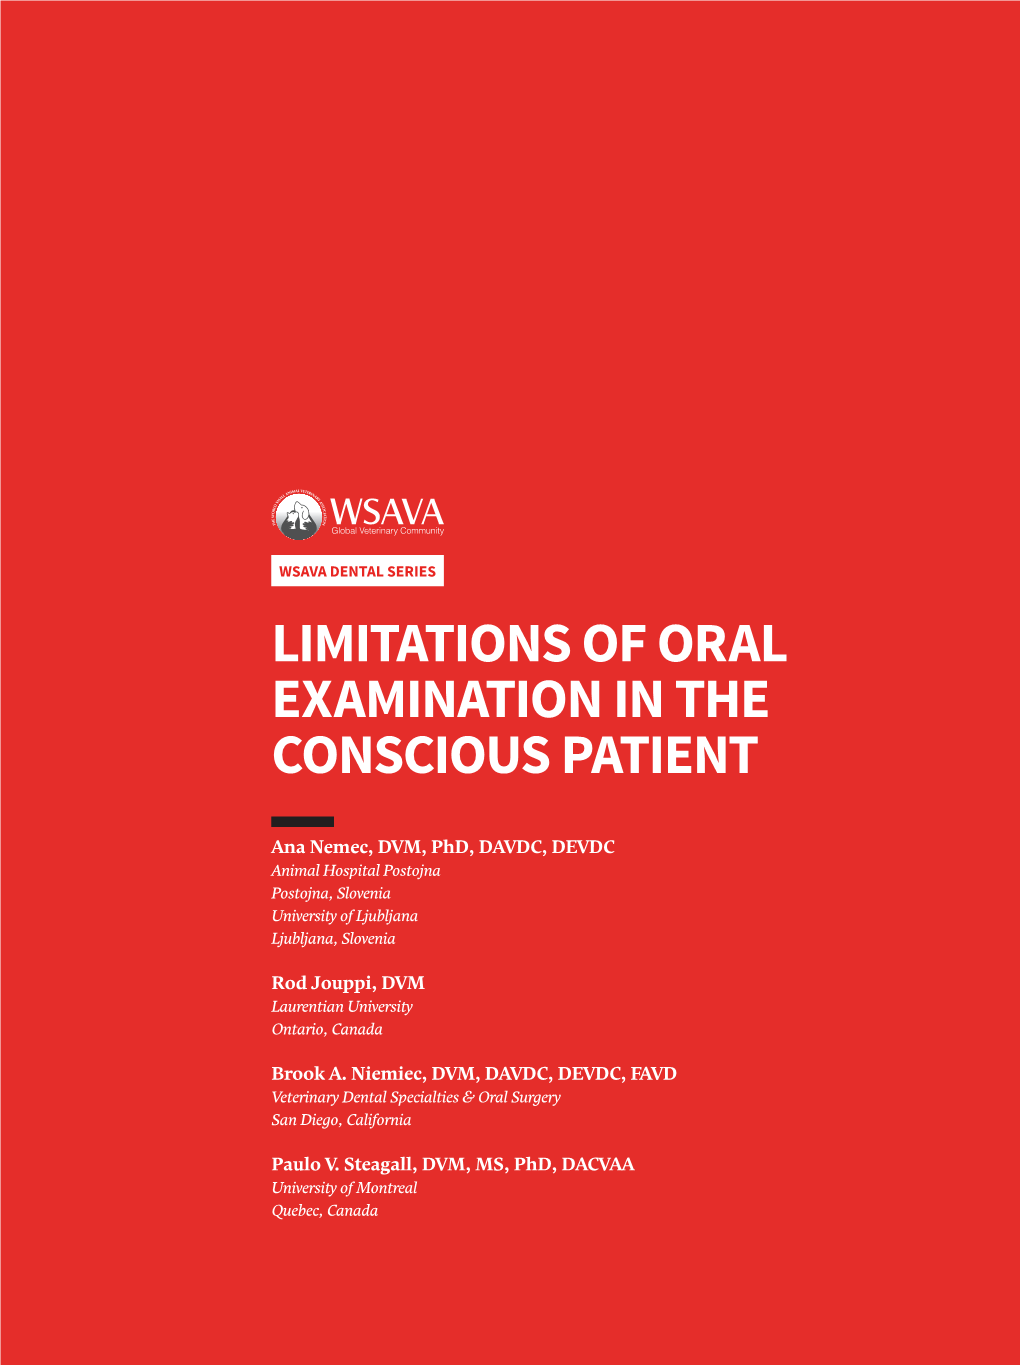 Limitations of Oral Examination in the Conscious Patient